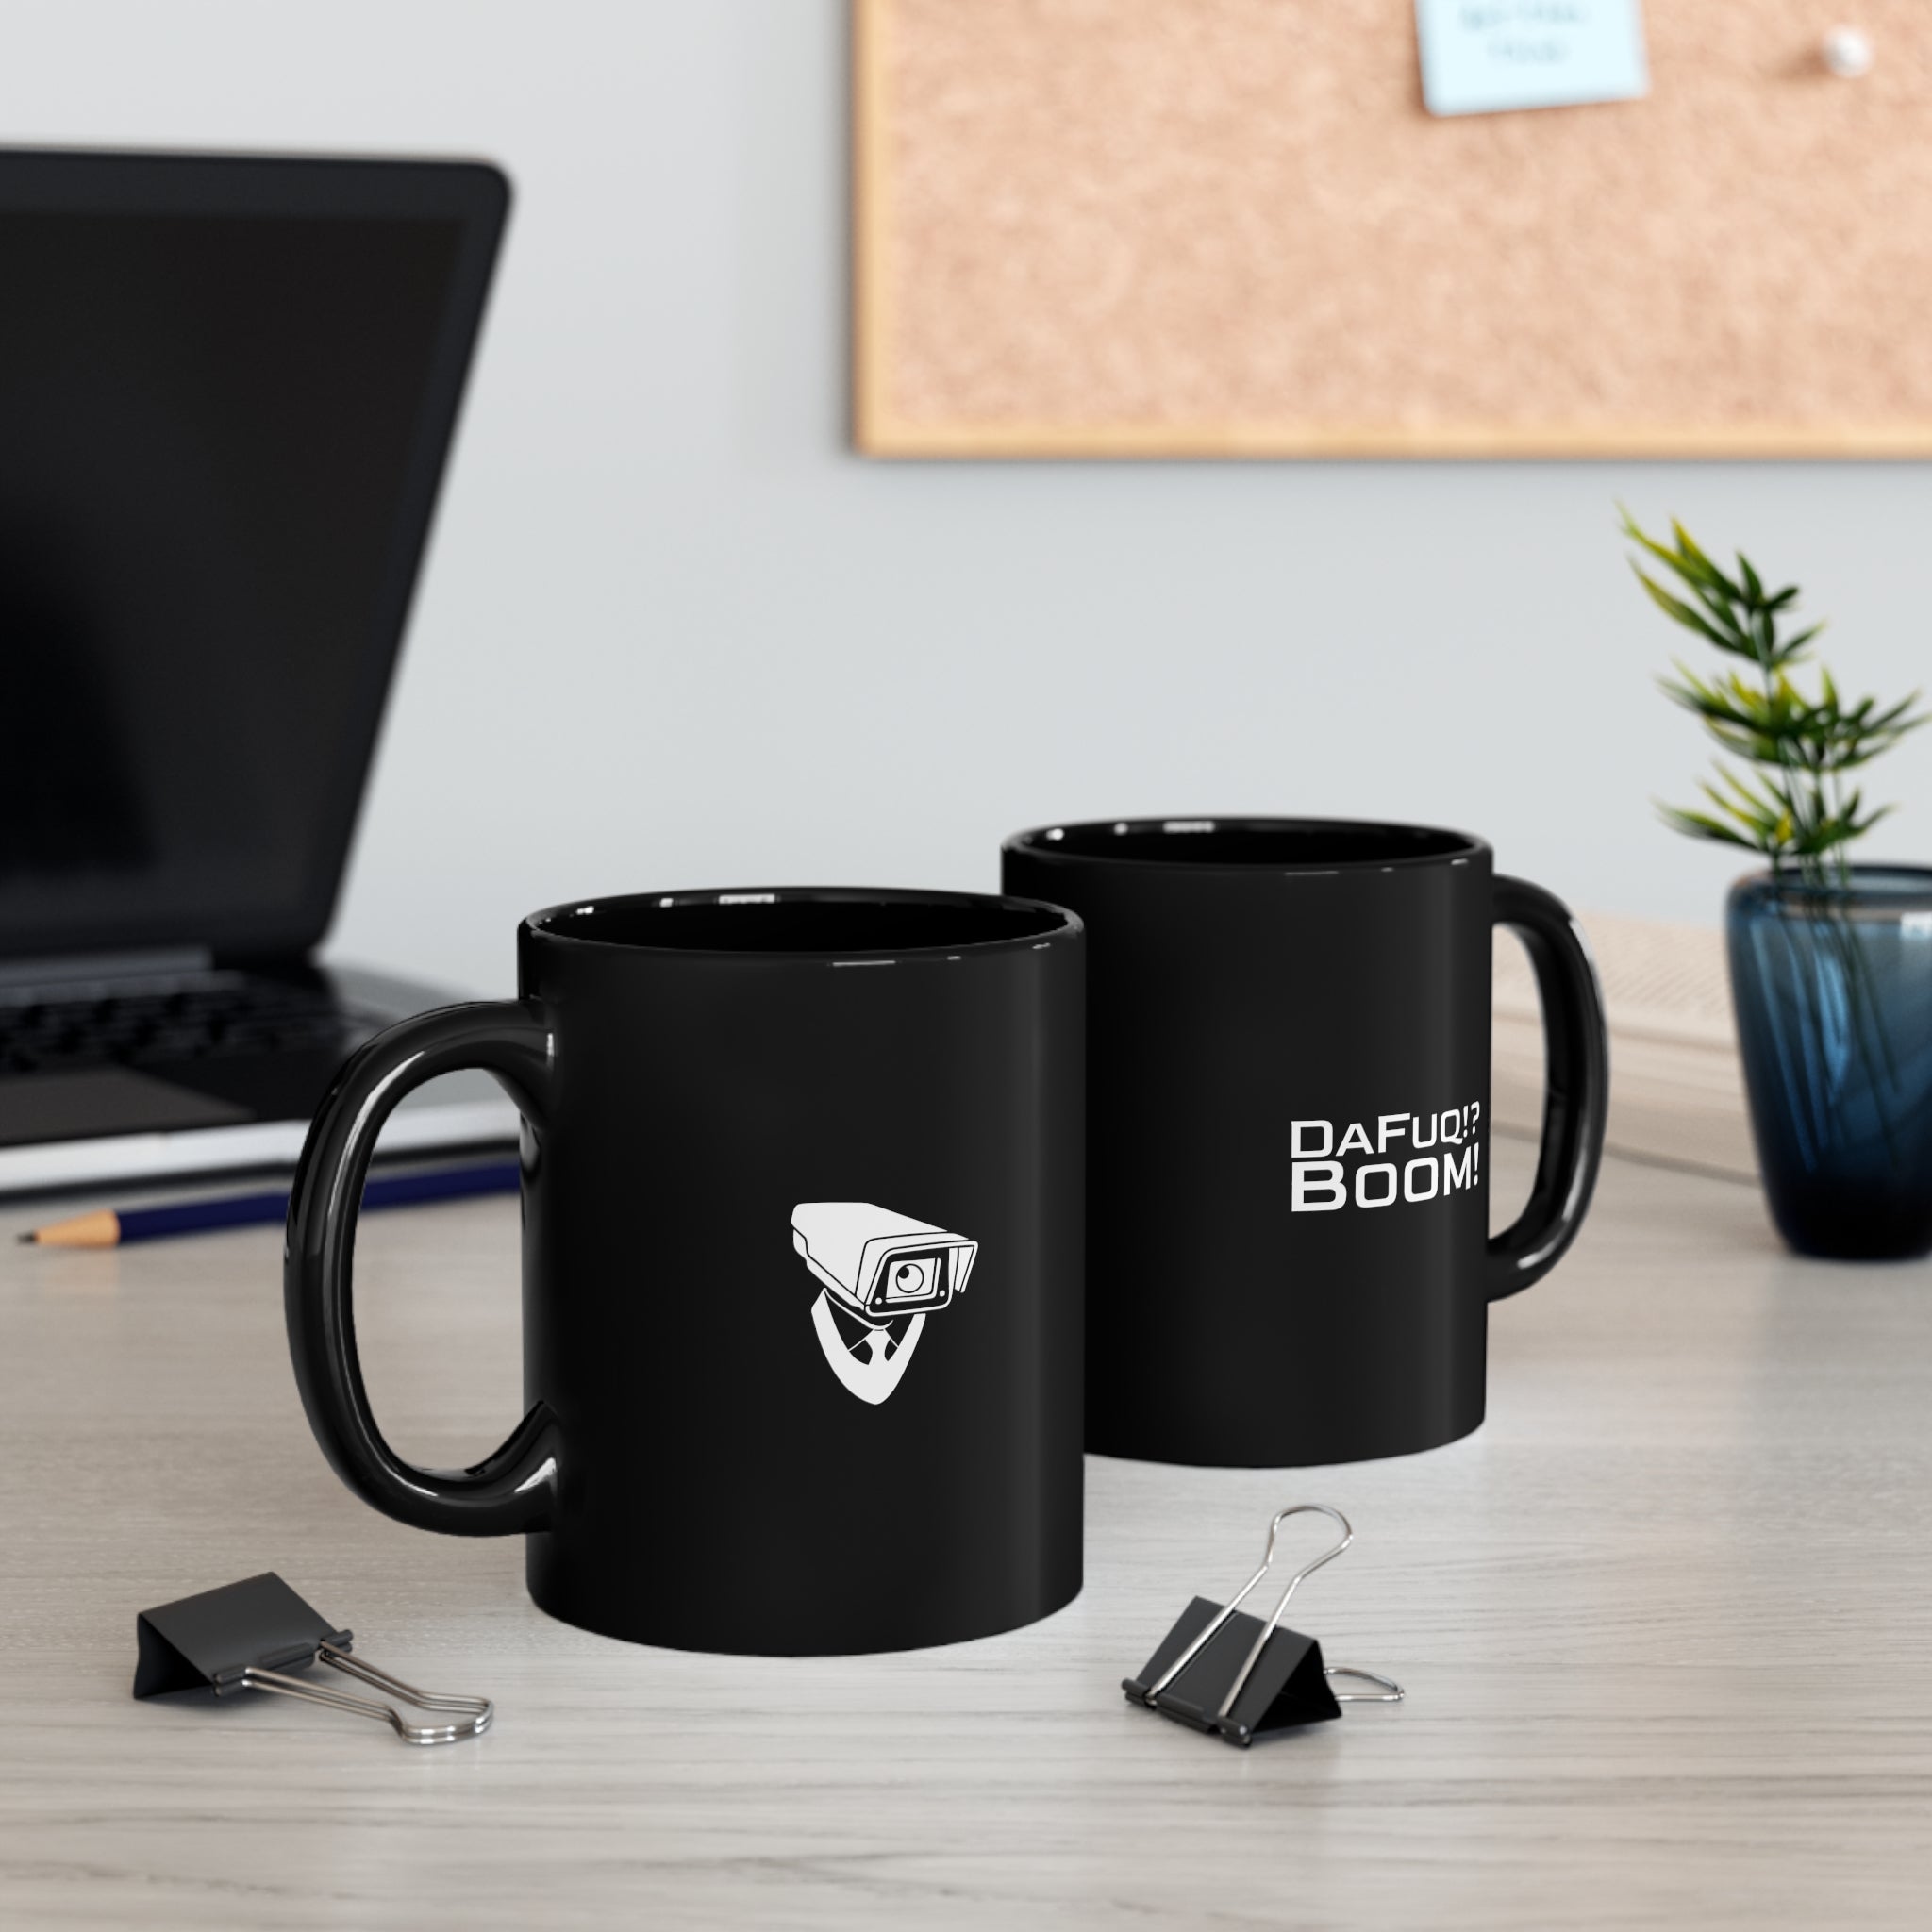 2 Glossy black mugs with DaFuq!?Boom! logo and camera icons on a wooden desk with laptop and clips and plant